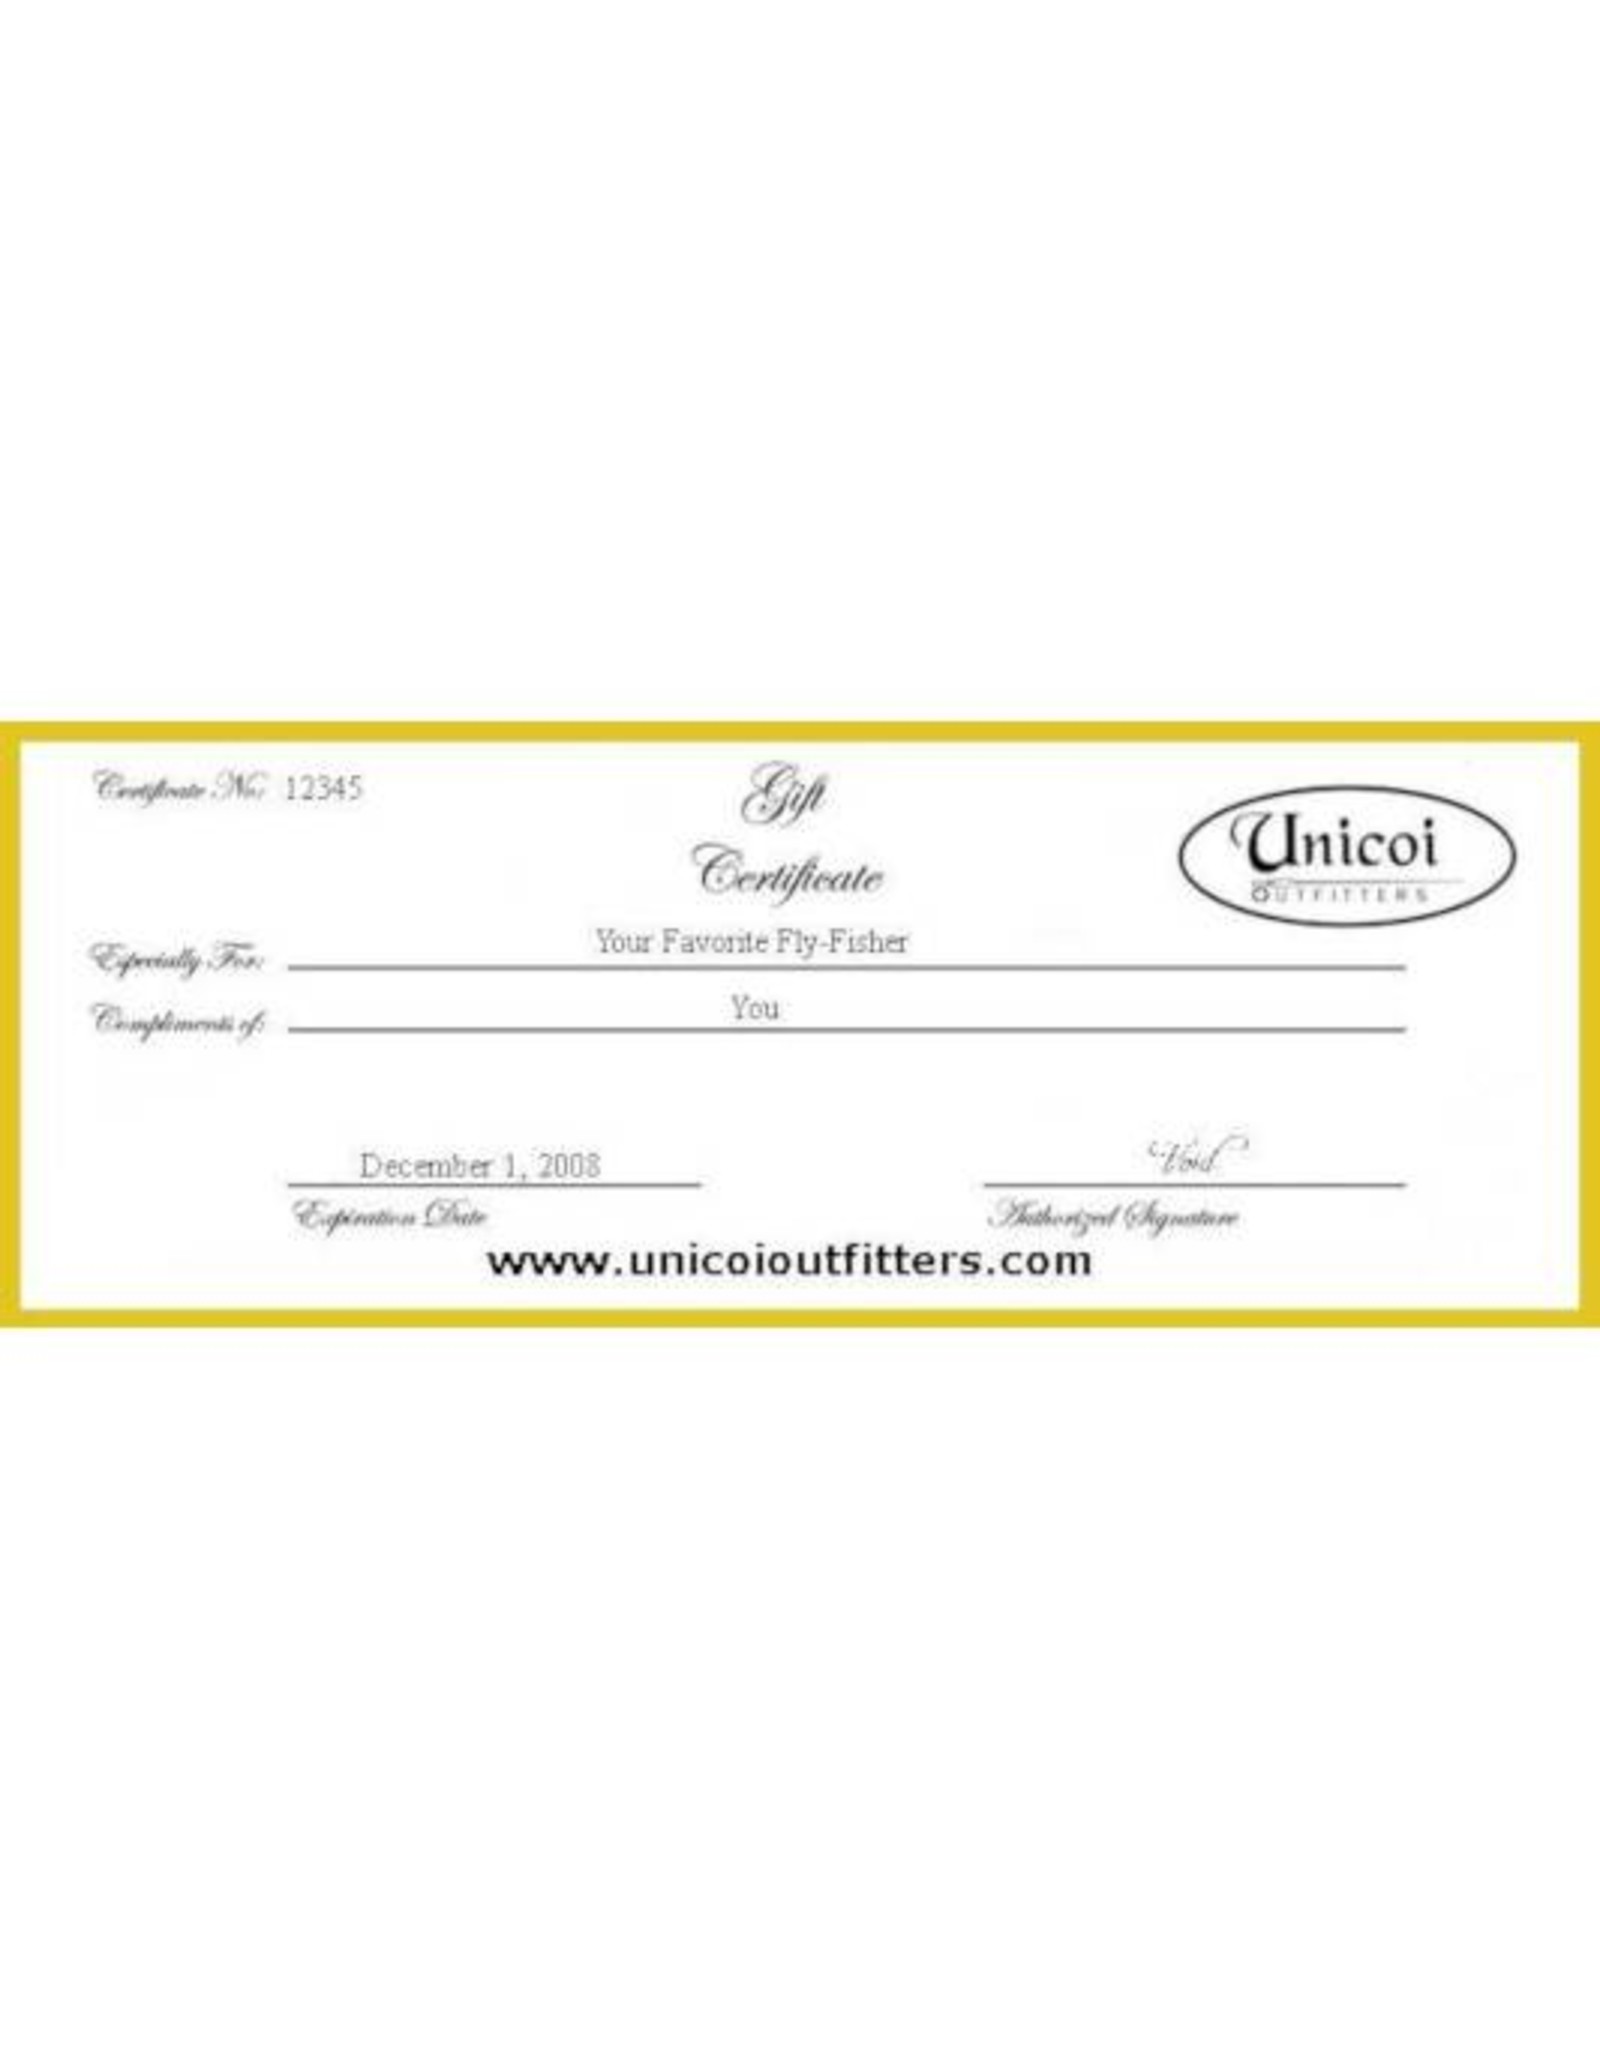 Unicoi Outfitters Gift Certificate - Fly Fishing Class